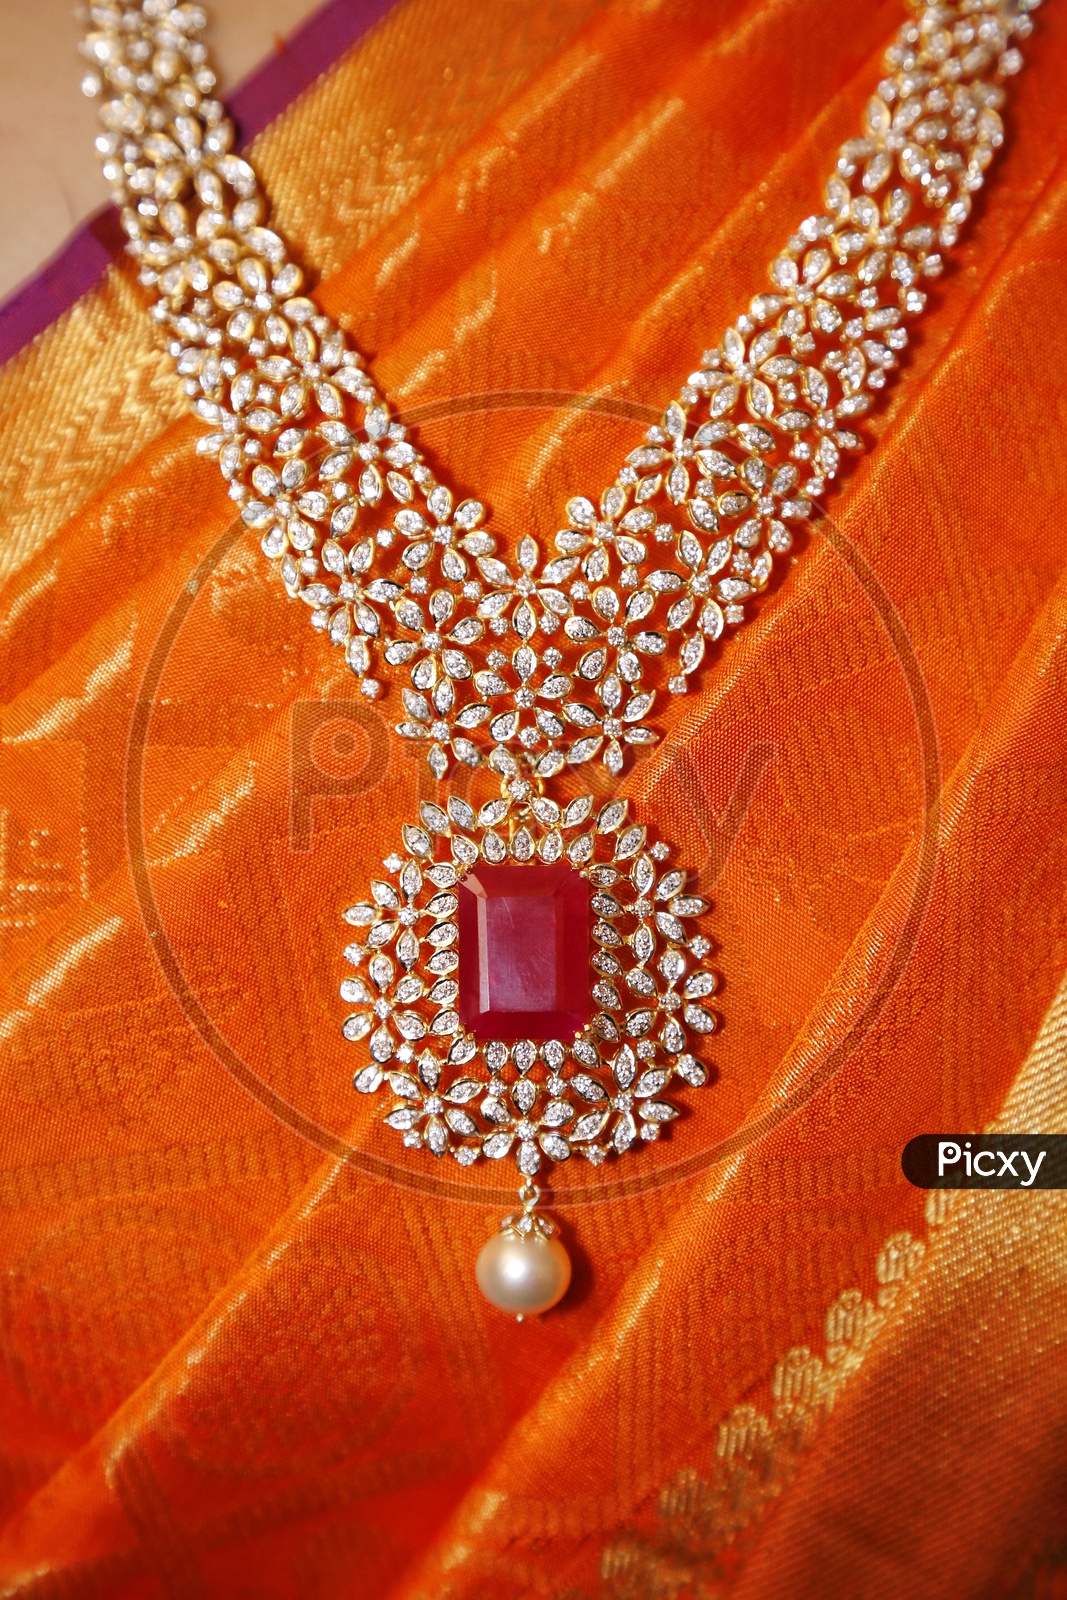 Gold Jewelry or Necklace For bride In Indian Telugu Wedding